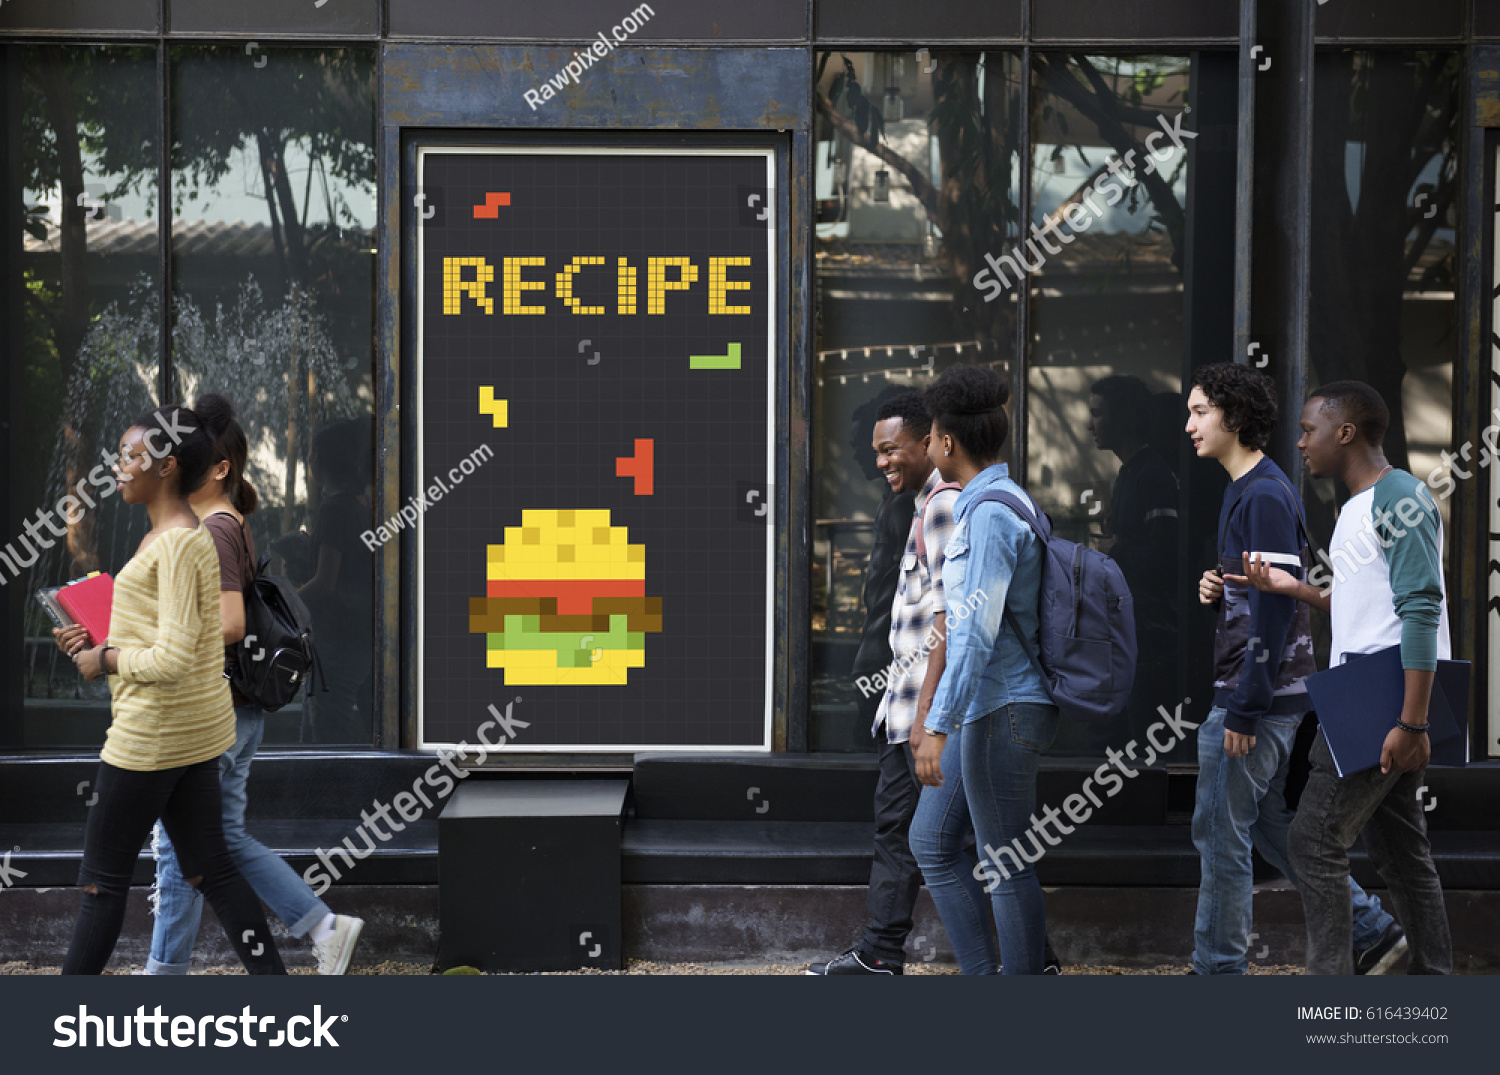 People with advertisement of 8 bit illustration of tasty burger meal #616439402